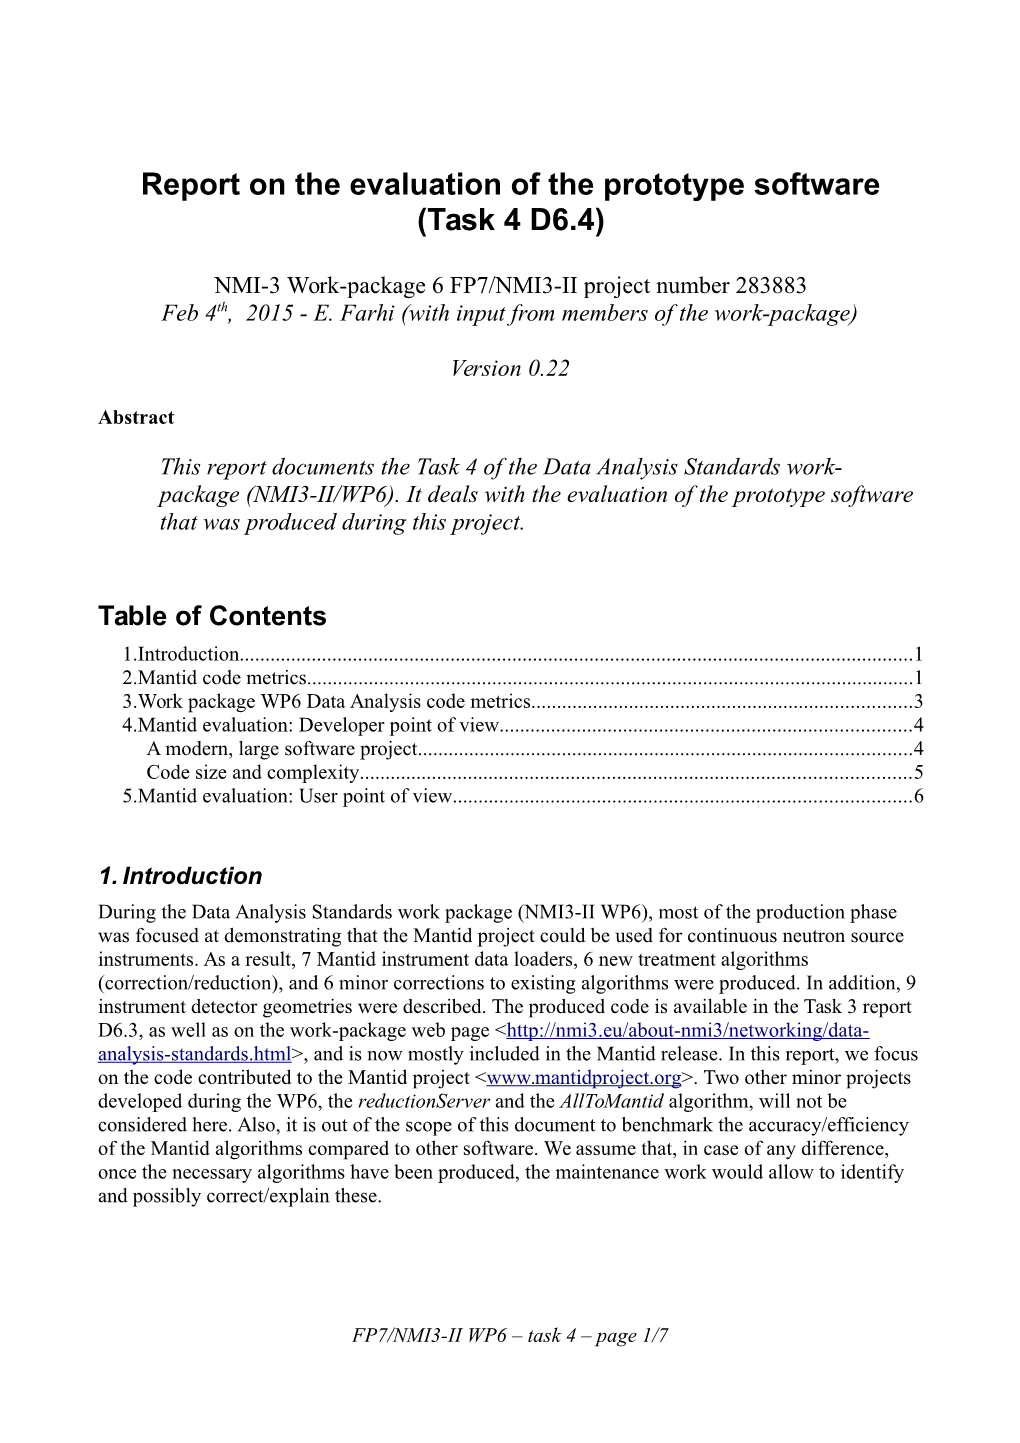 Report on the Evaluation of the Prototype Software (Task 4 D6.4)